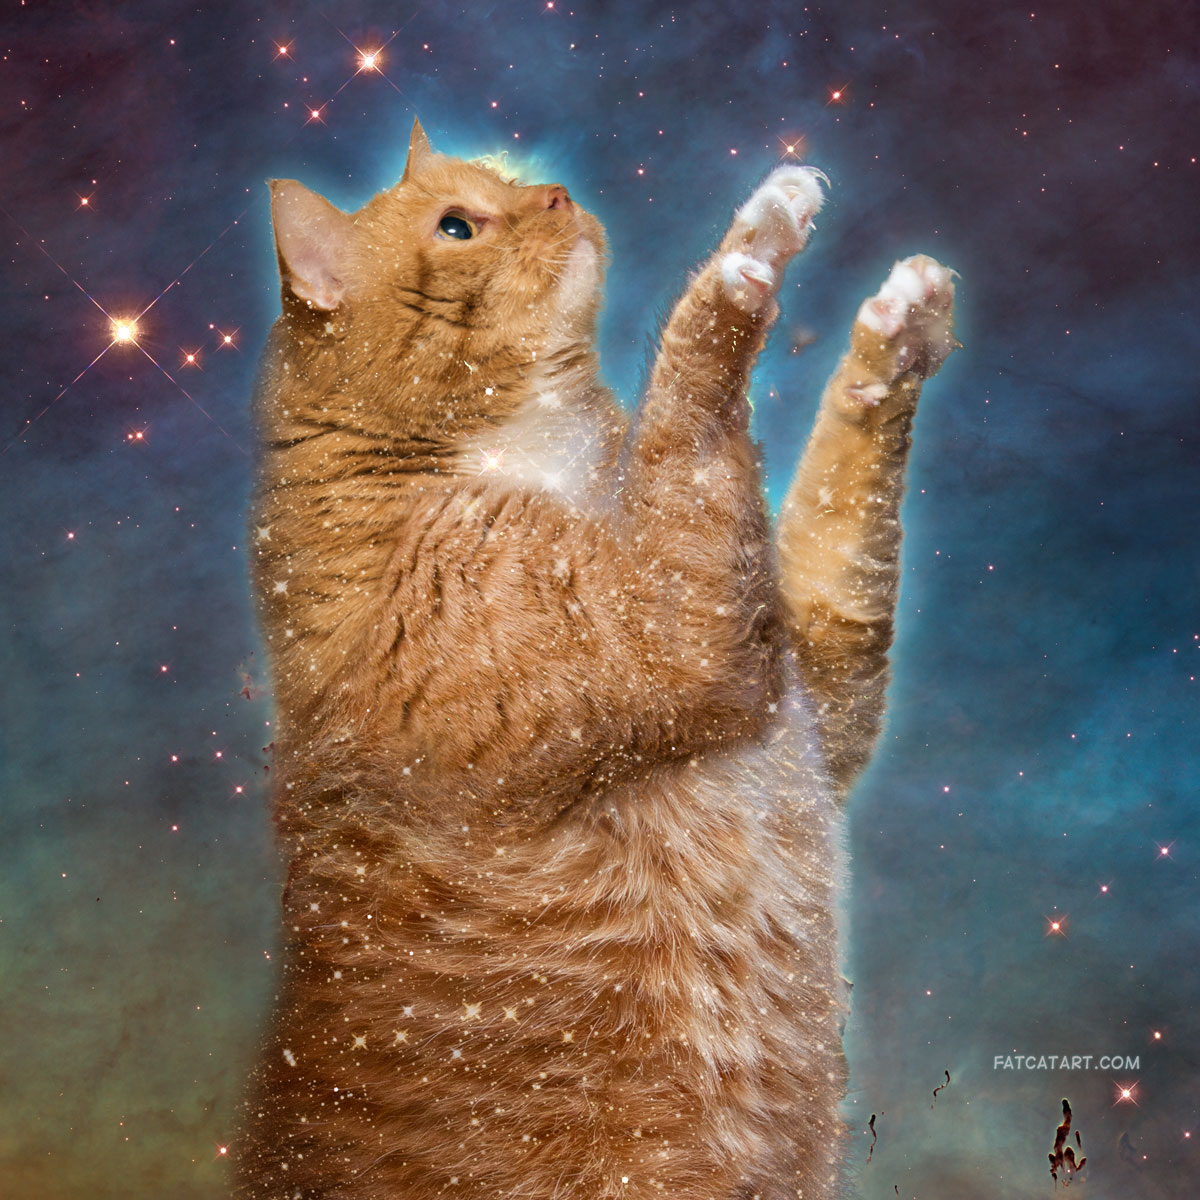 The Pillars of Creation: the Celestial Cat is discovered in the depth of the galaxy